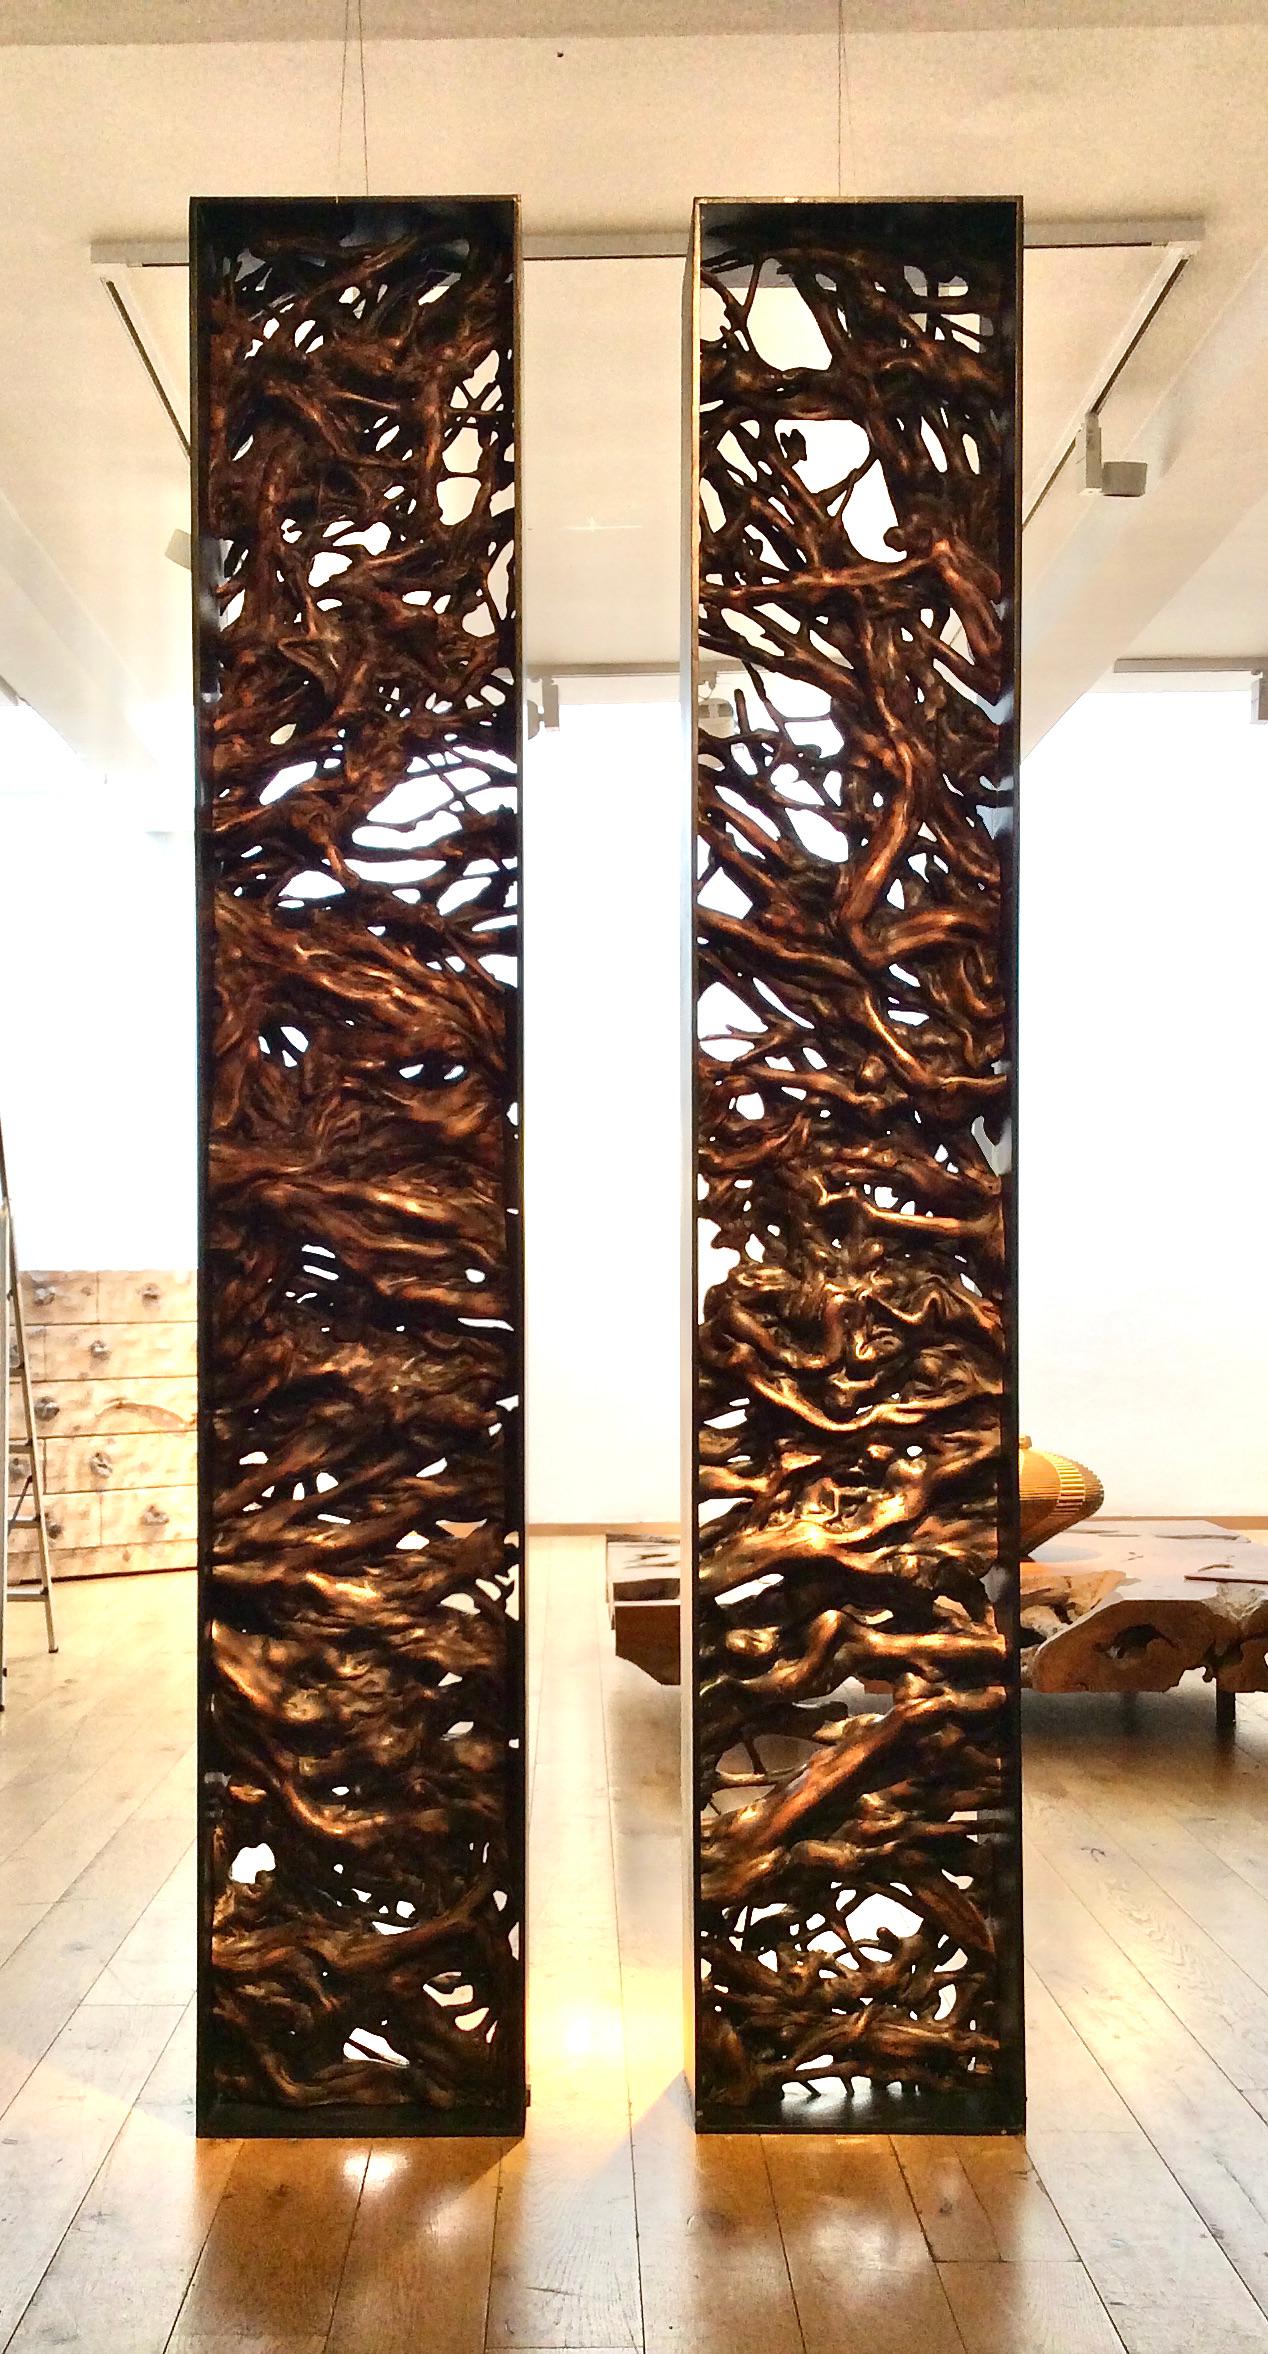 Impressive pair of free standing organic sculptures of polished litchi roots, each in patinated iron frame.
Would be stunning as a room divider, providing textural interest and an engaging focal point.
 